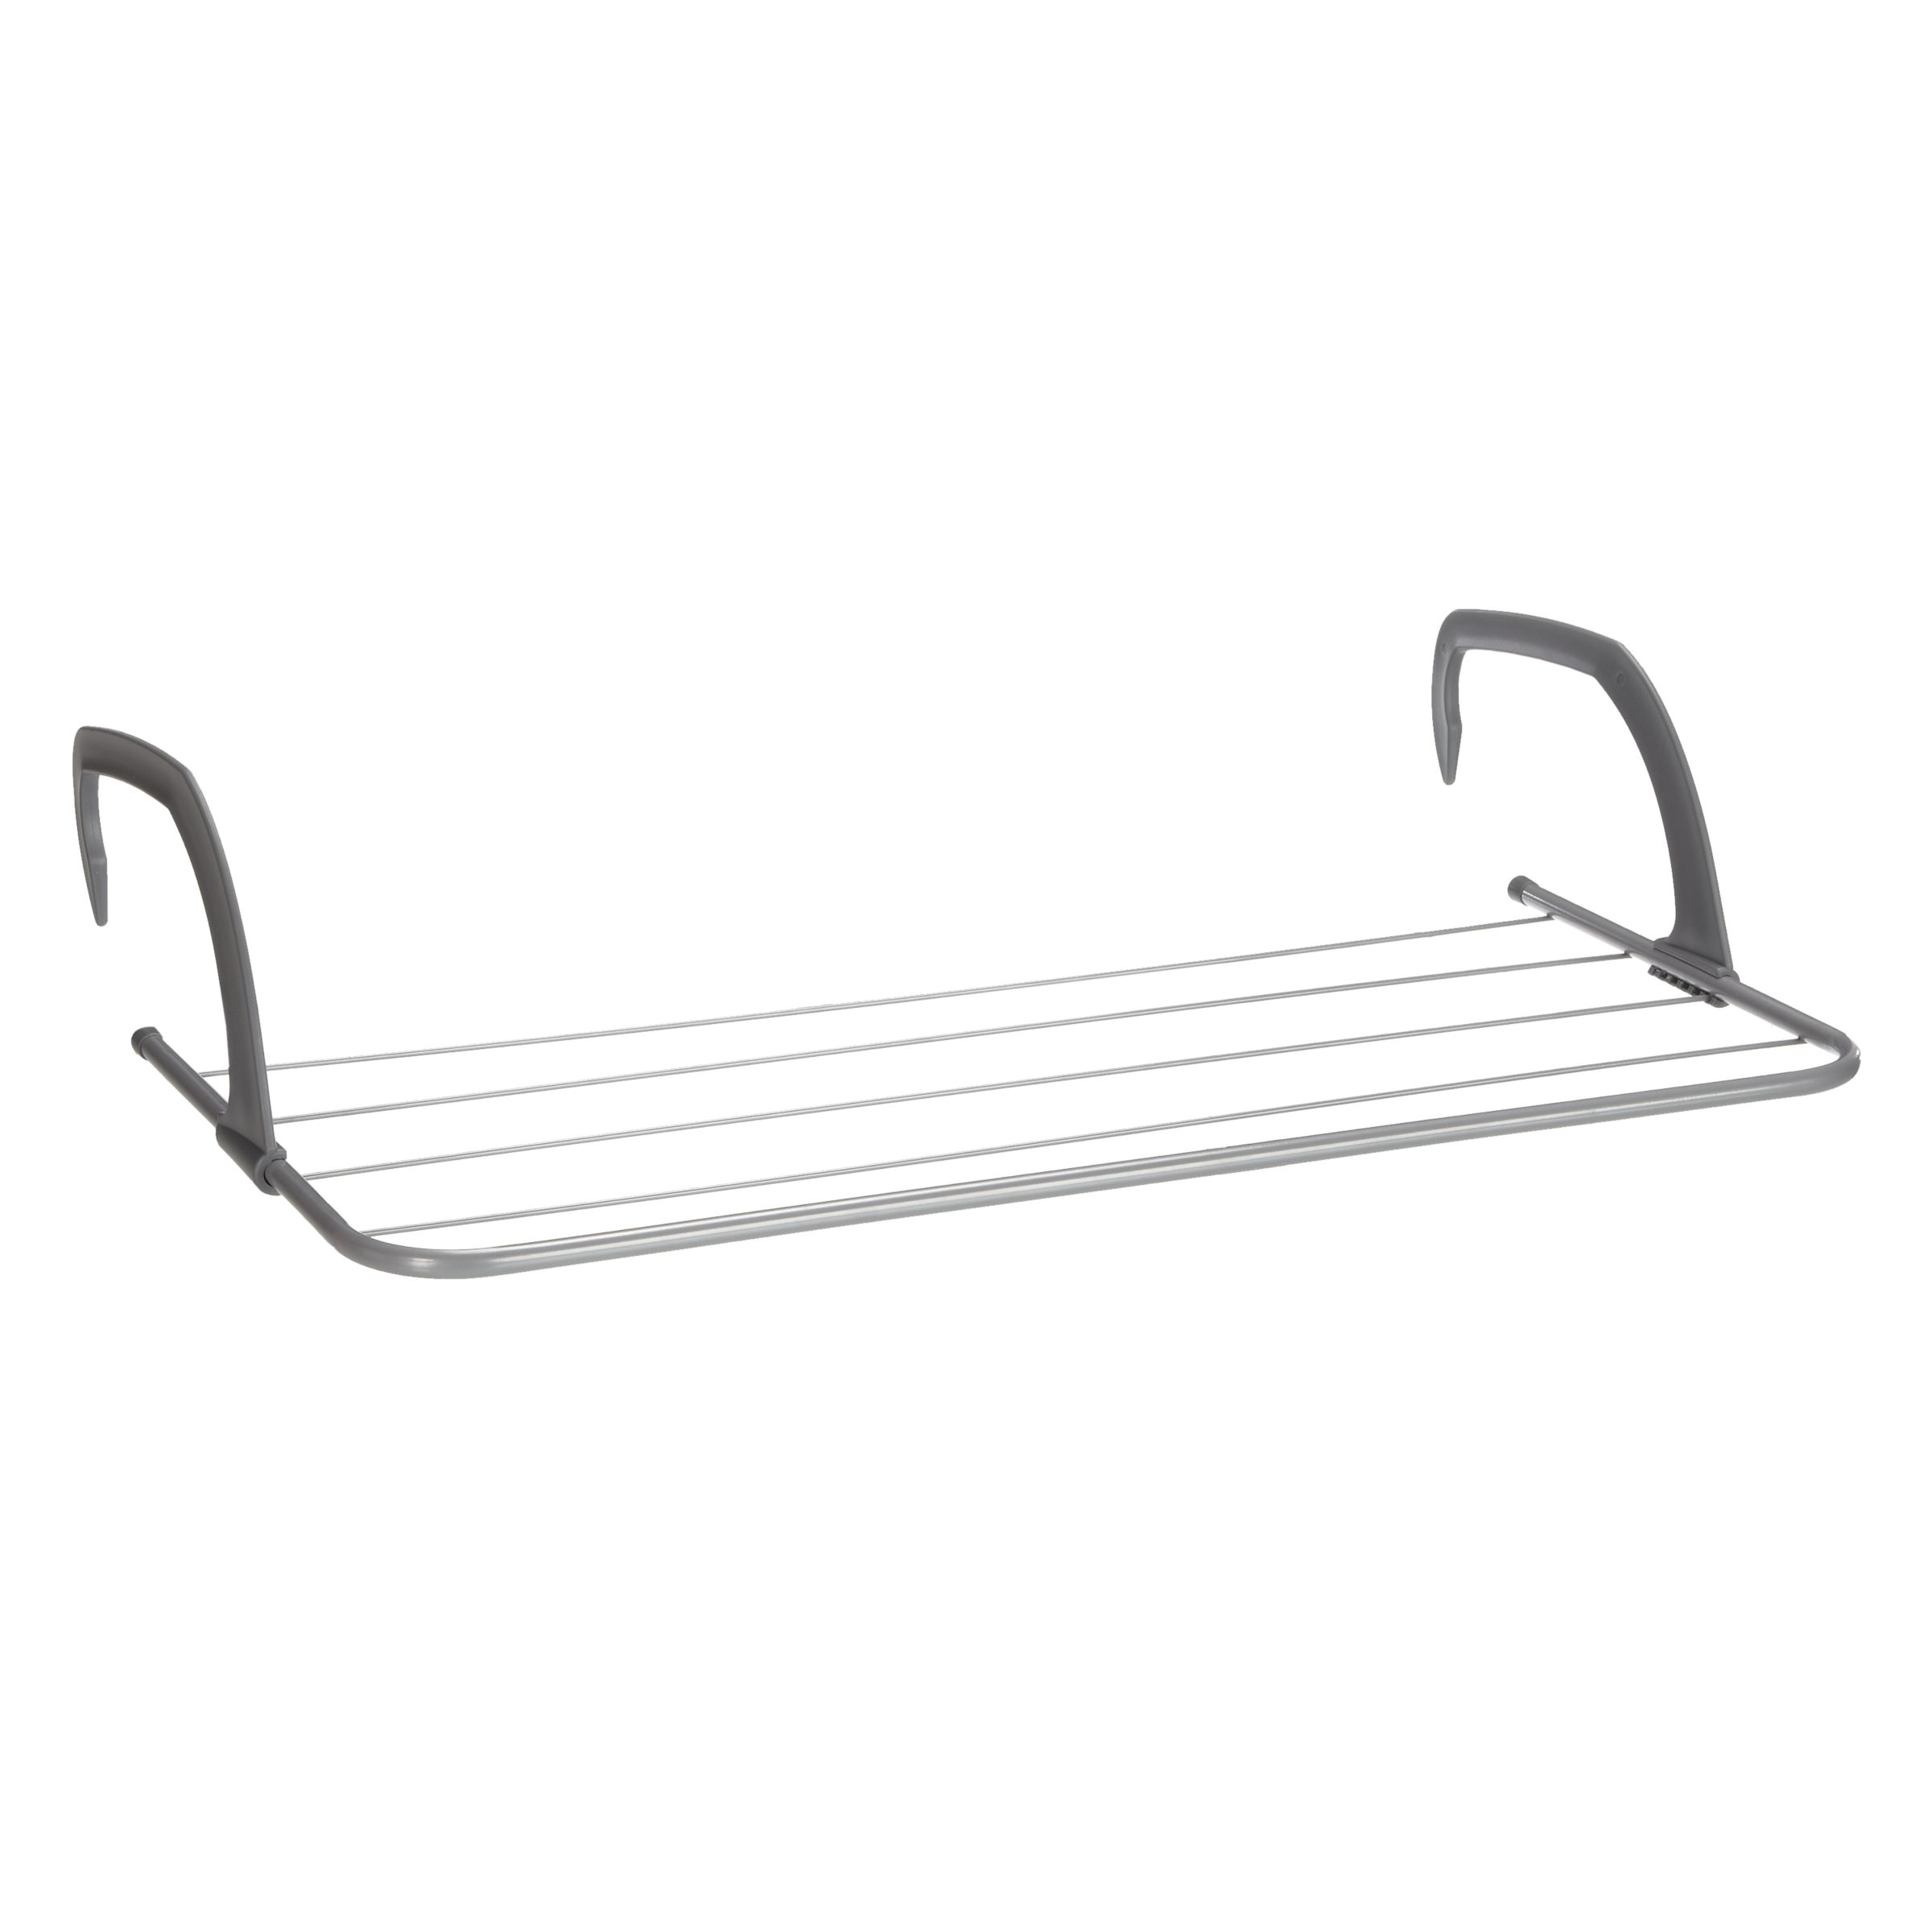 John Lewis & Partners Radiator Clothes Airer